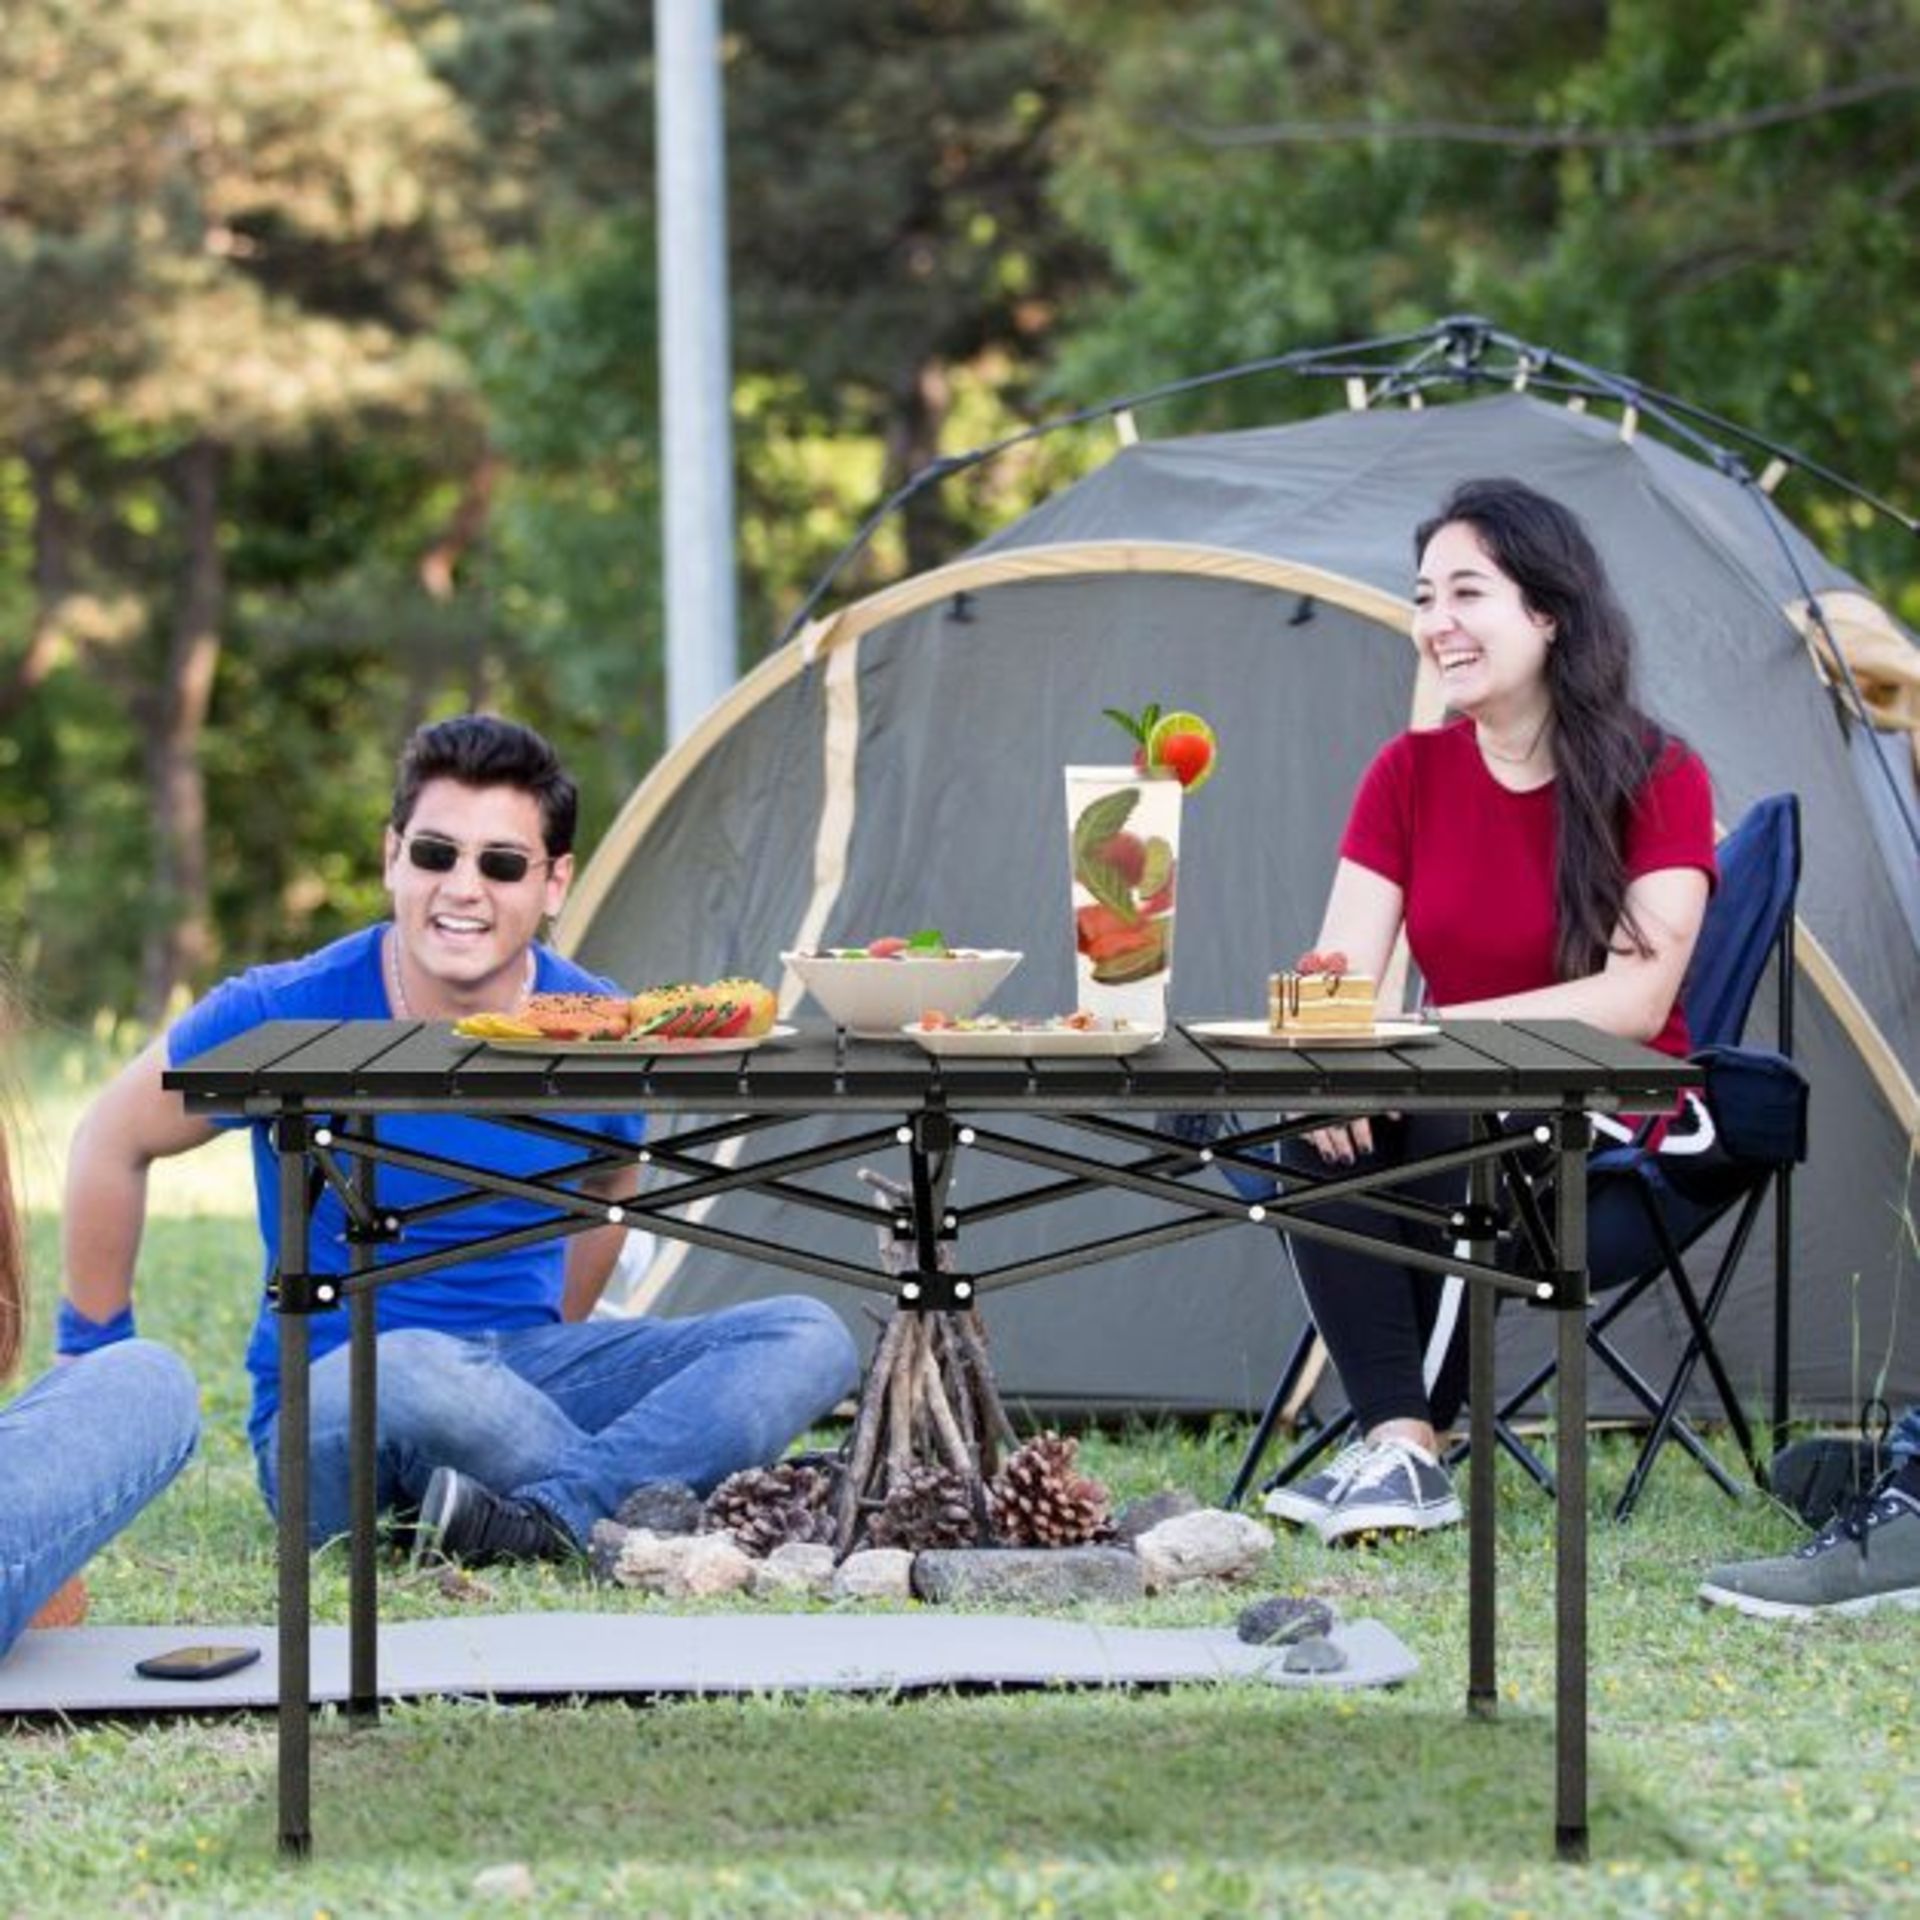 Aluminum Camping Table for 4-6 People. - ER24. Enjoy an outdoor adventure with the folding camping